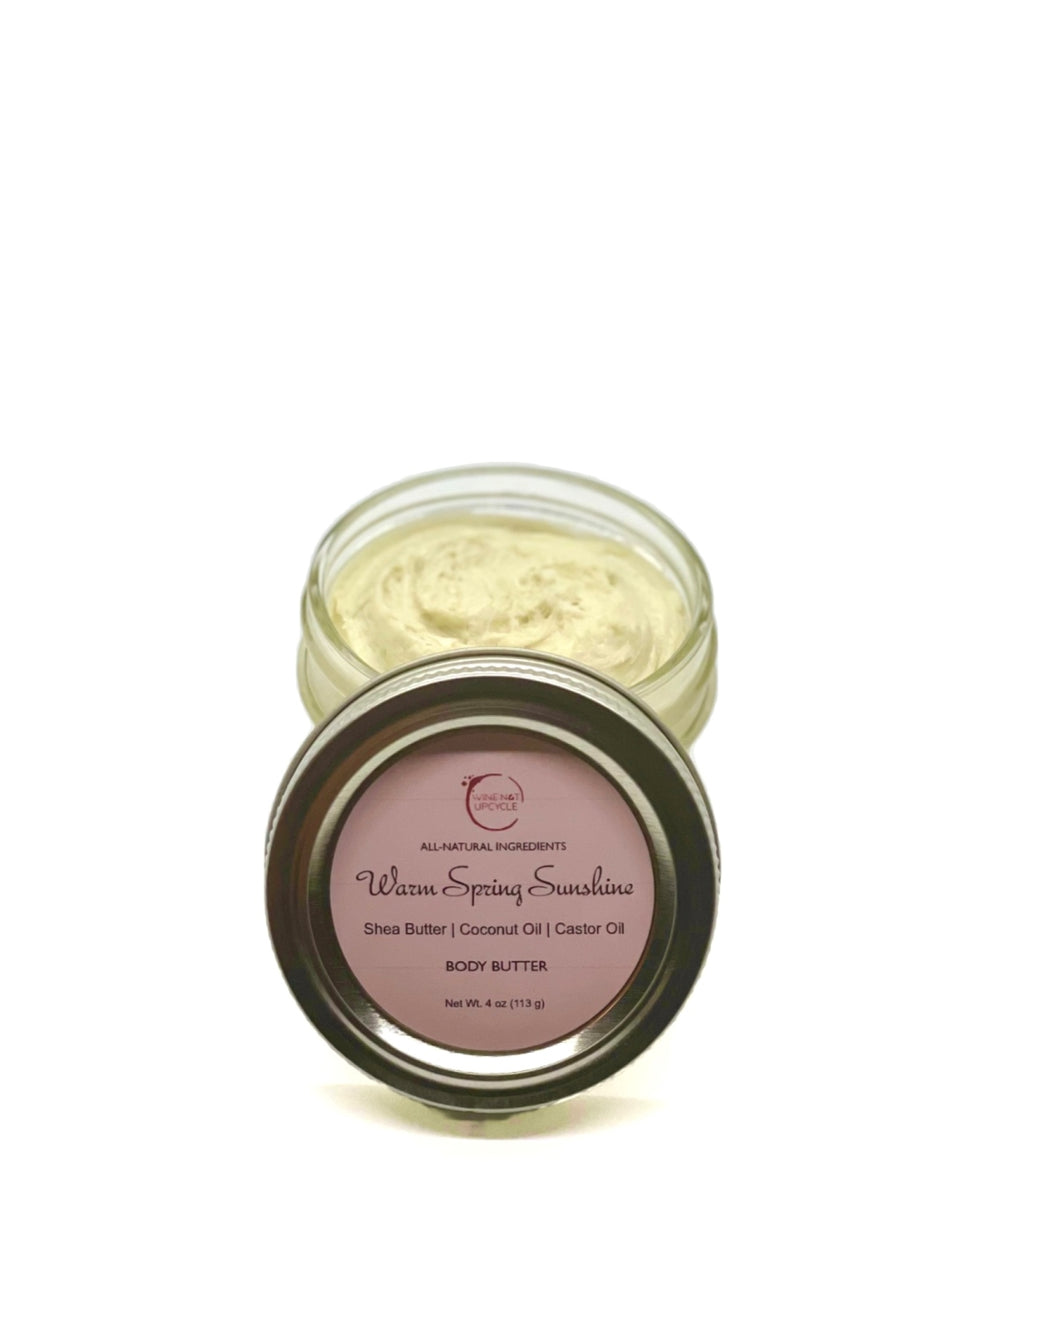 Warm Spring Sunshine Whipped Body Butter Body Butter Wine Not Upcycle   